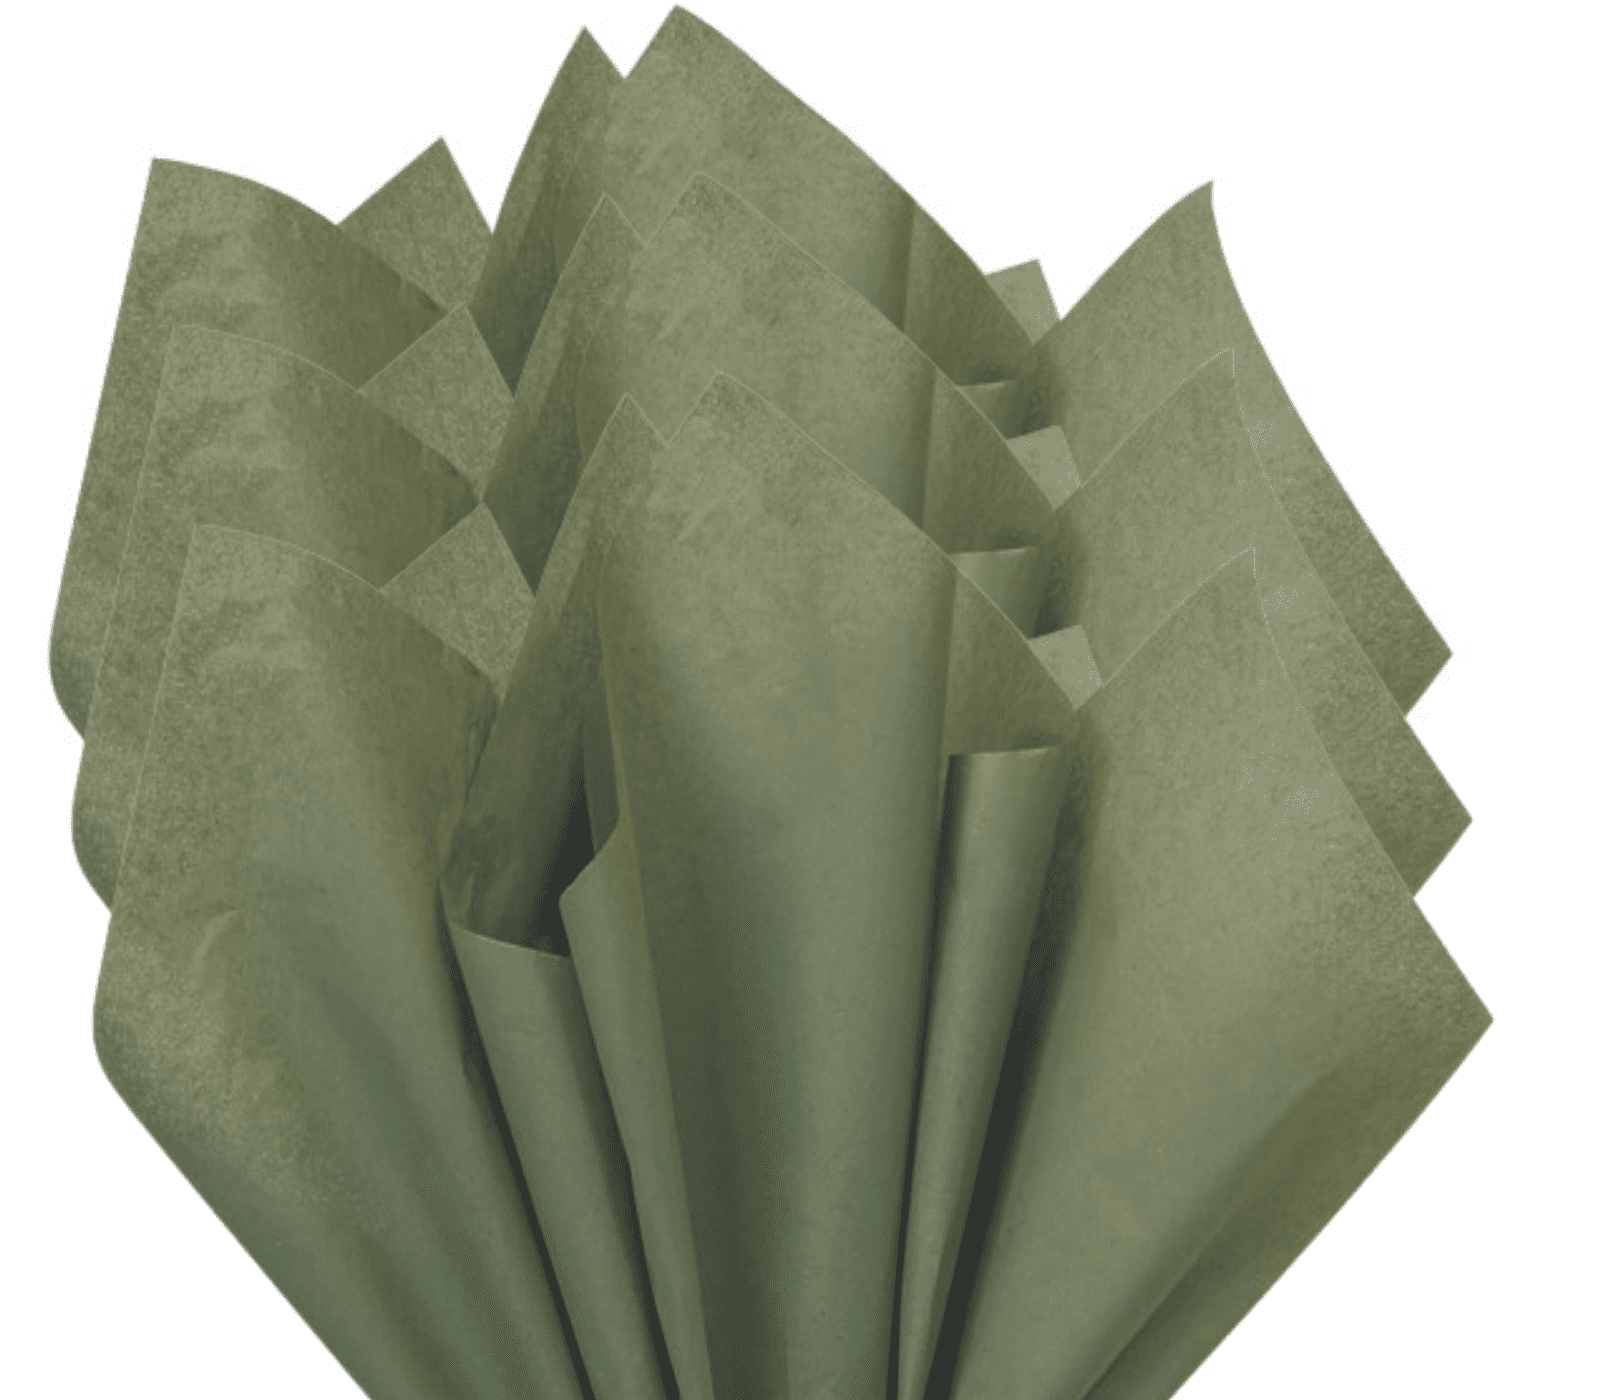 90 Sheets 20 * 14 Inches Sage Gradient Green and Ivory Tissue Paper Set  Assorted Willow Green Ivory Gift Wrapping Paper (Sage Green)